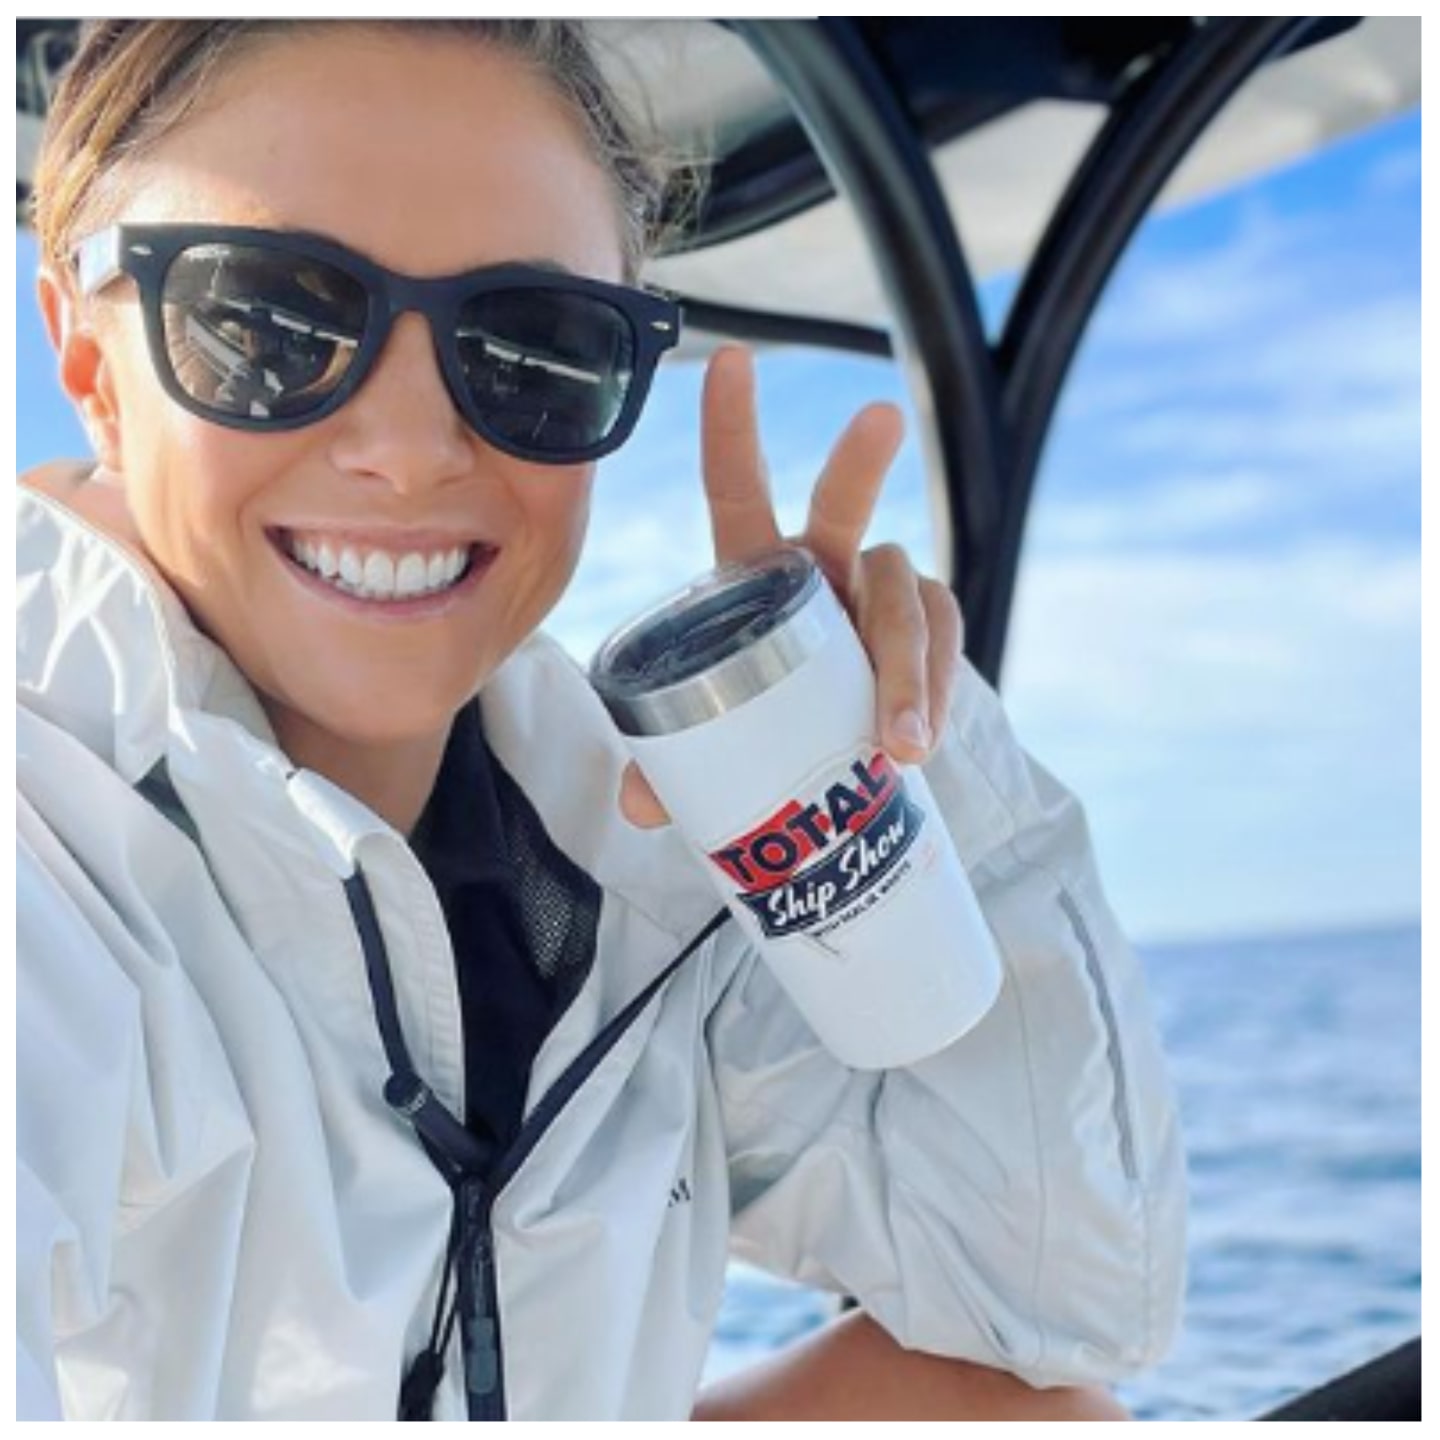 Malia White from 'Below Deck Med' gives the peace sign while wearing sunglasses and holding a tumbler